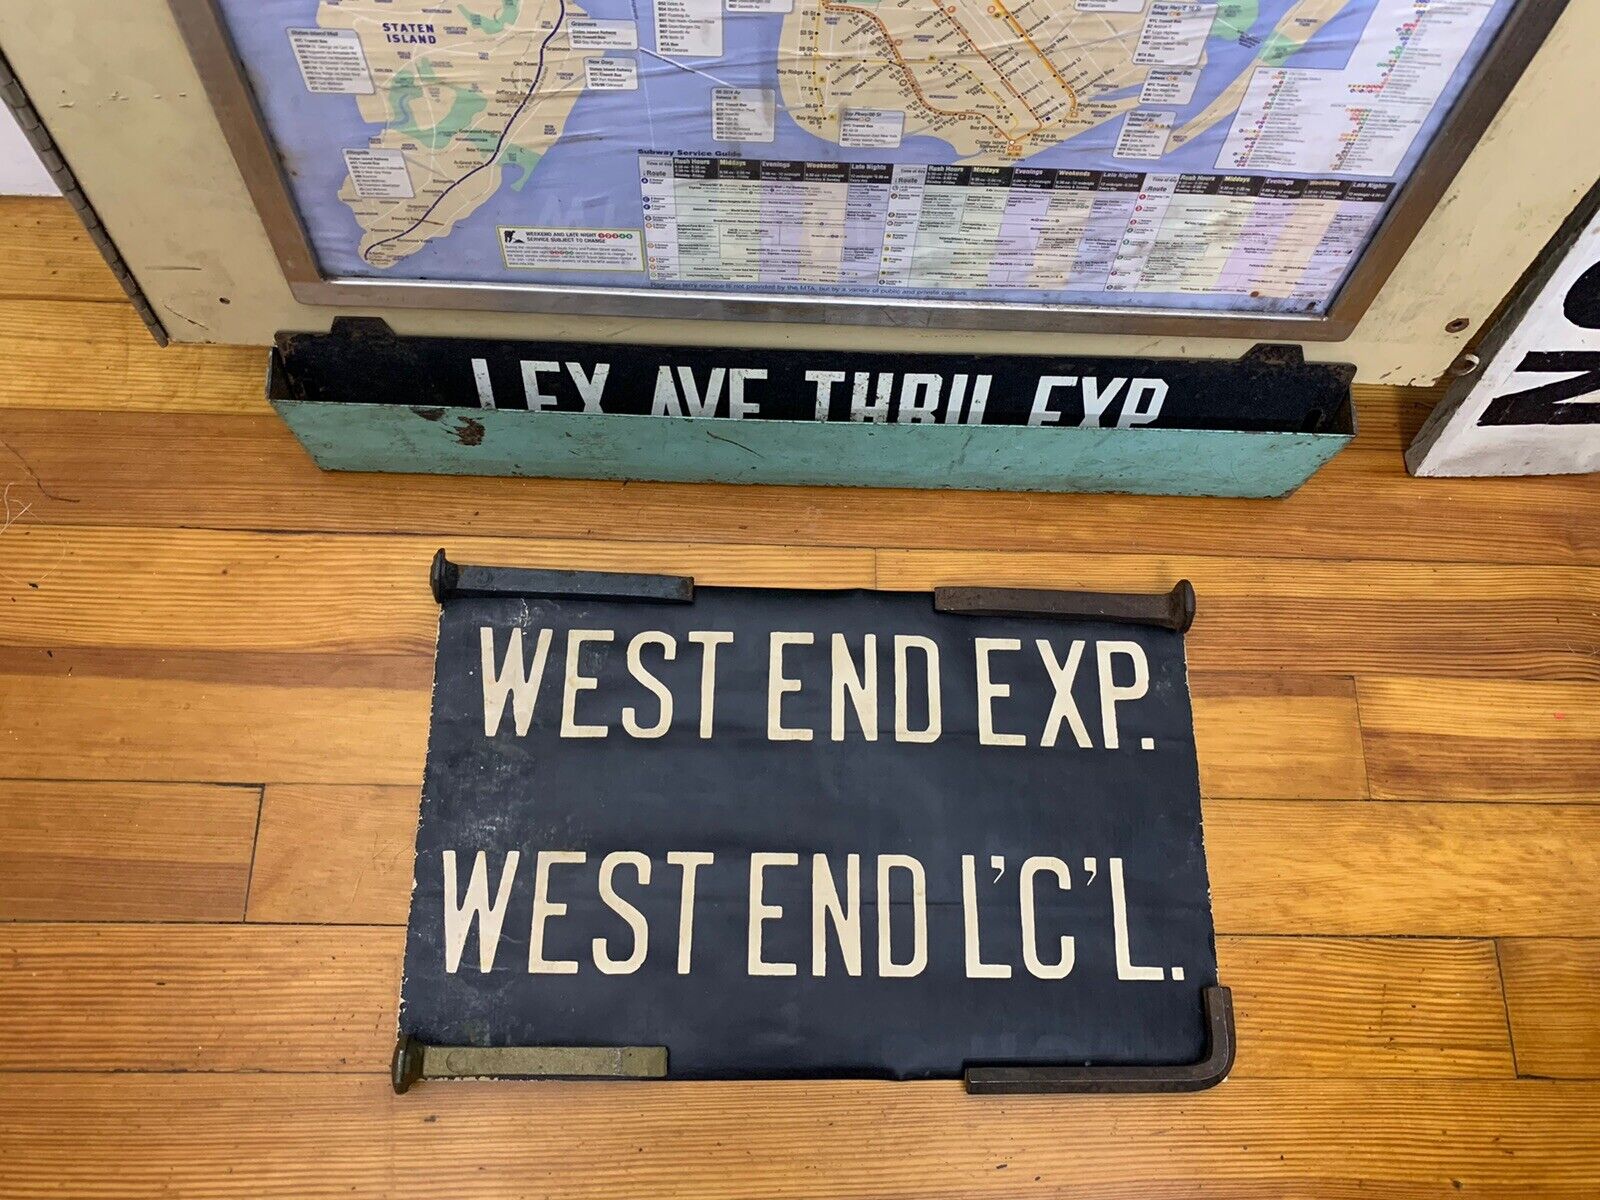 NY NYC SUBWAY SIGN PRIMITIVE UPPER WEST END LUXURY CONDOS WEALTHY LOCAL EXPRESS